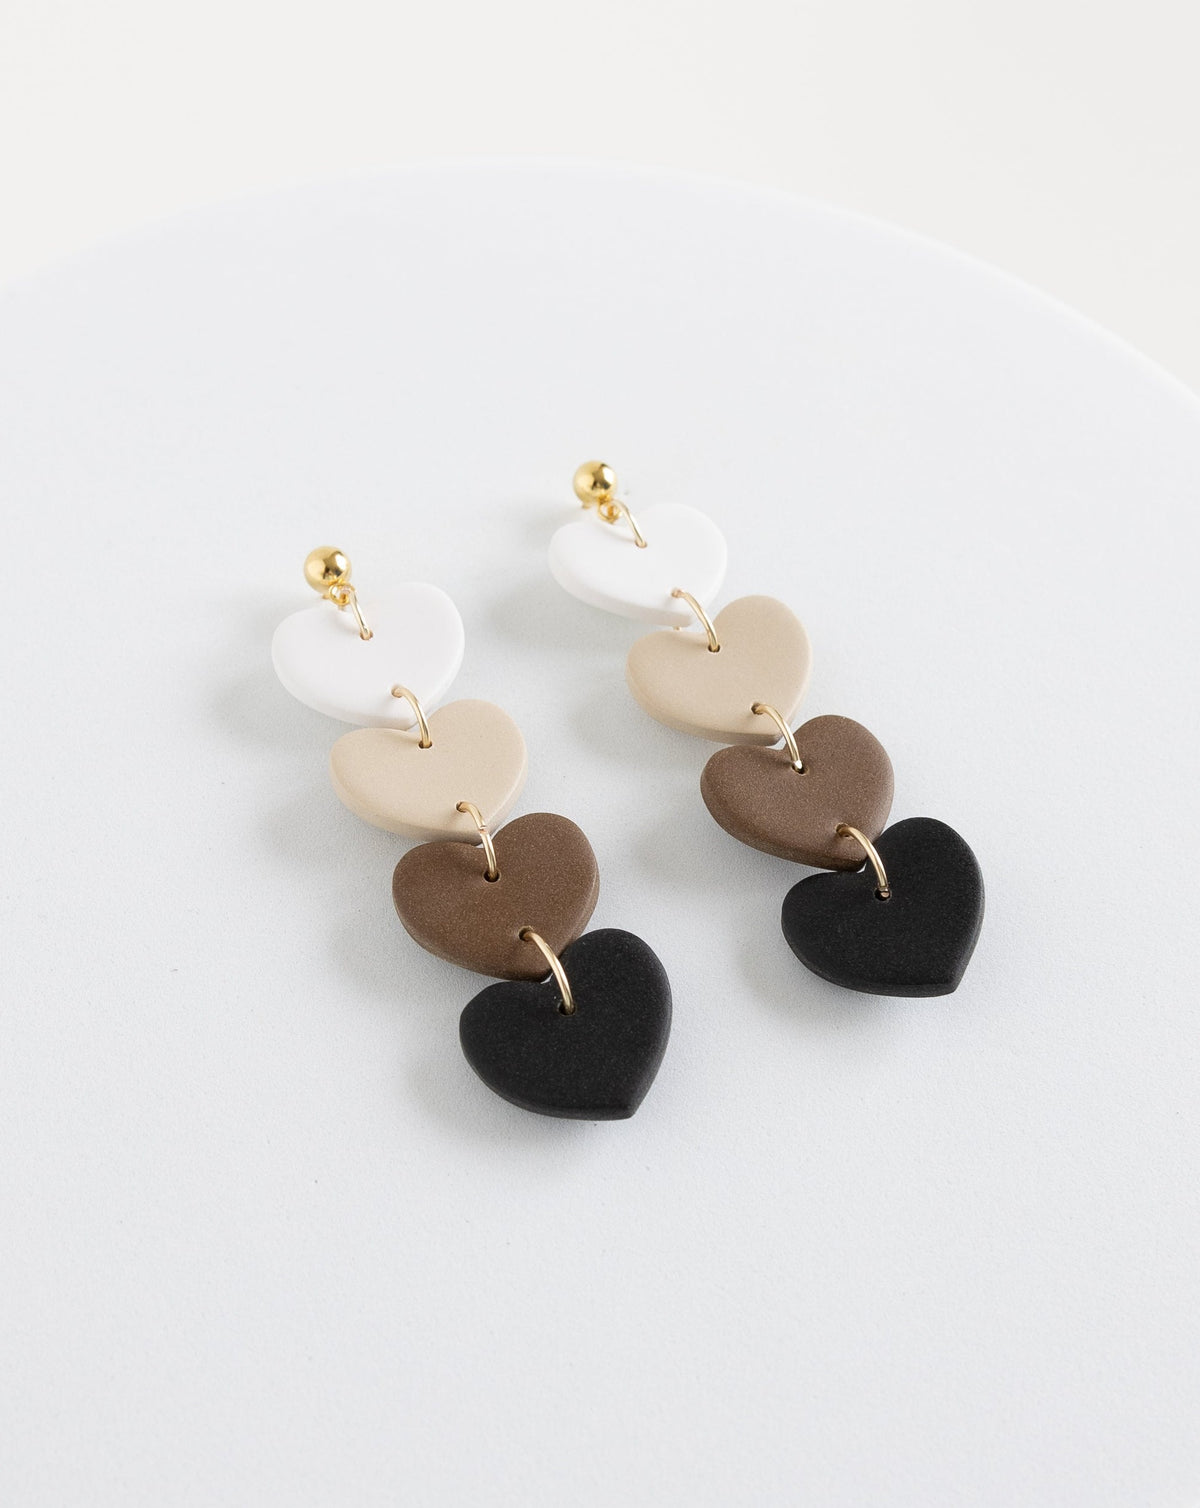 Elegant Heart Chain Earrings by LYHO, Allergy-Free and Nickel-Free, Perfect for Sensitive Skin in gold plated studs.